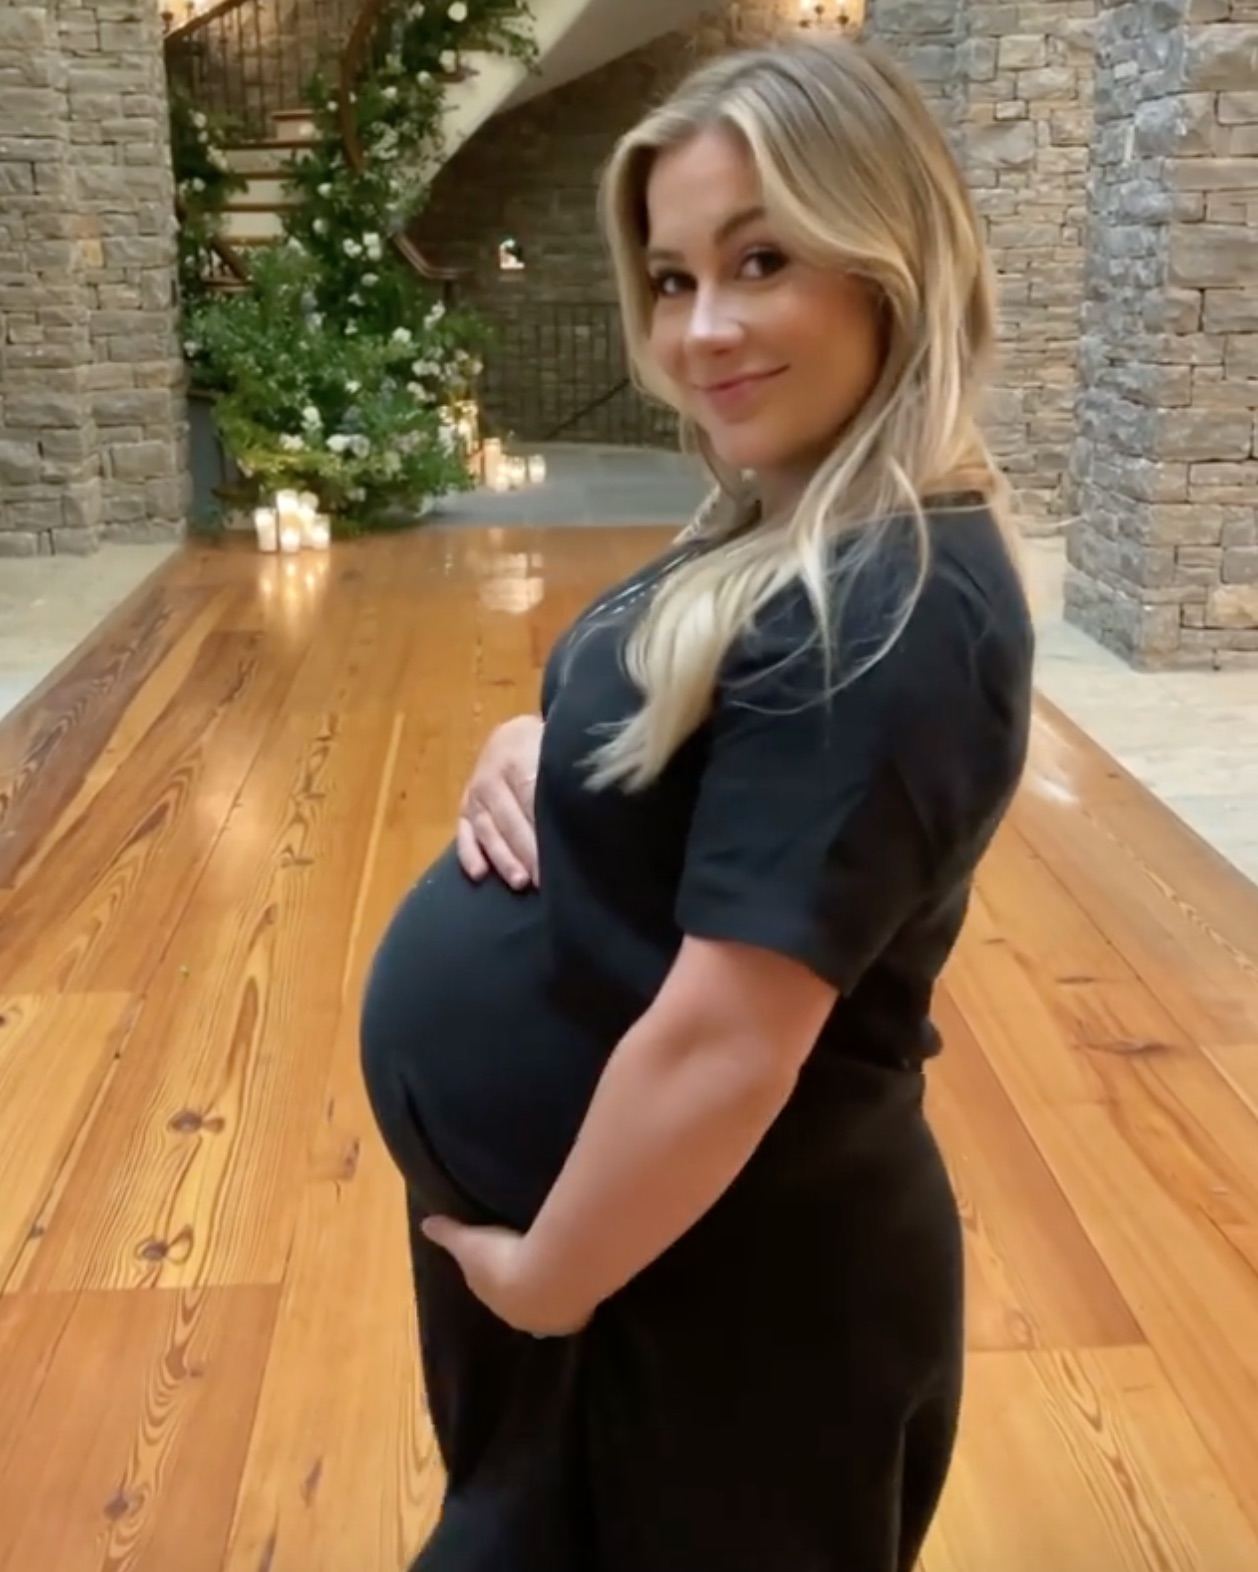 Pregnant Shawn Johnson East’s Baby Bump Pics Ahead of 2nd Child | Us Weekly